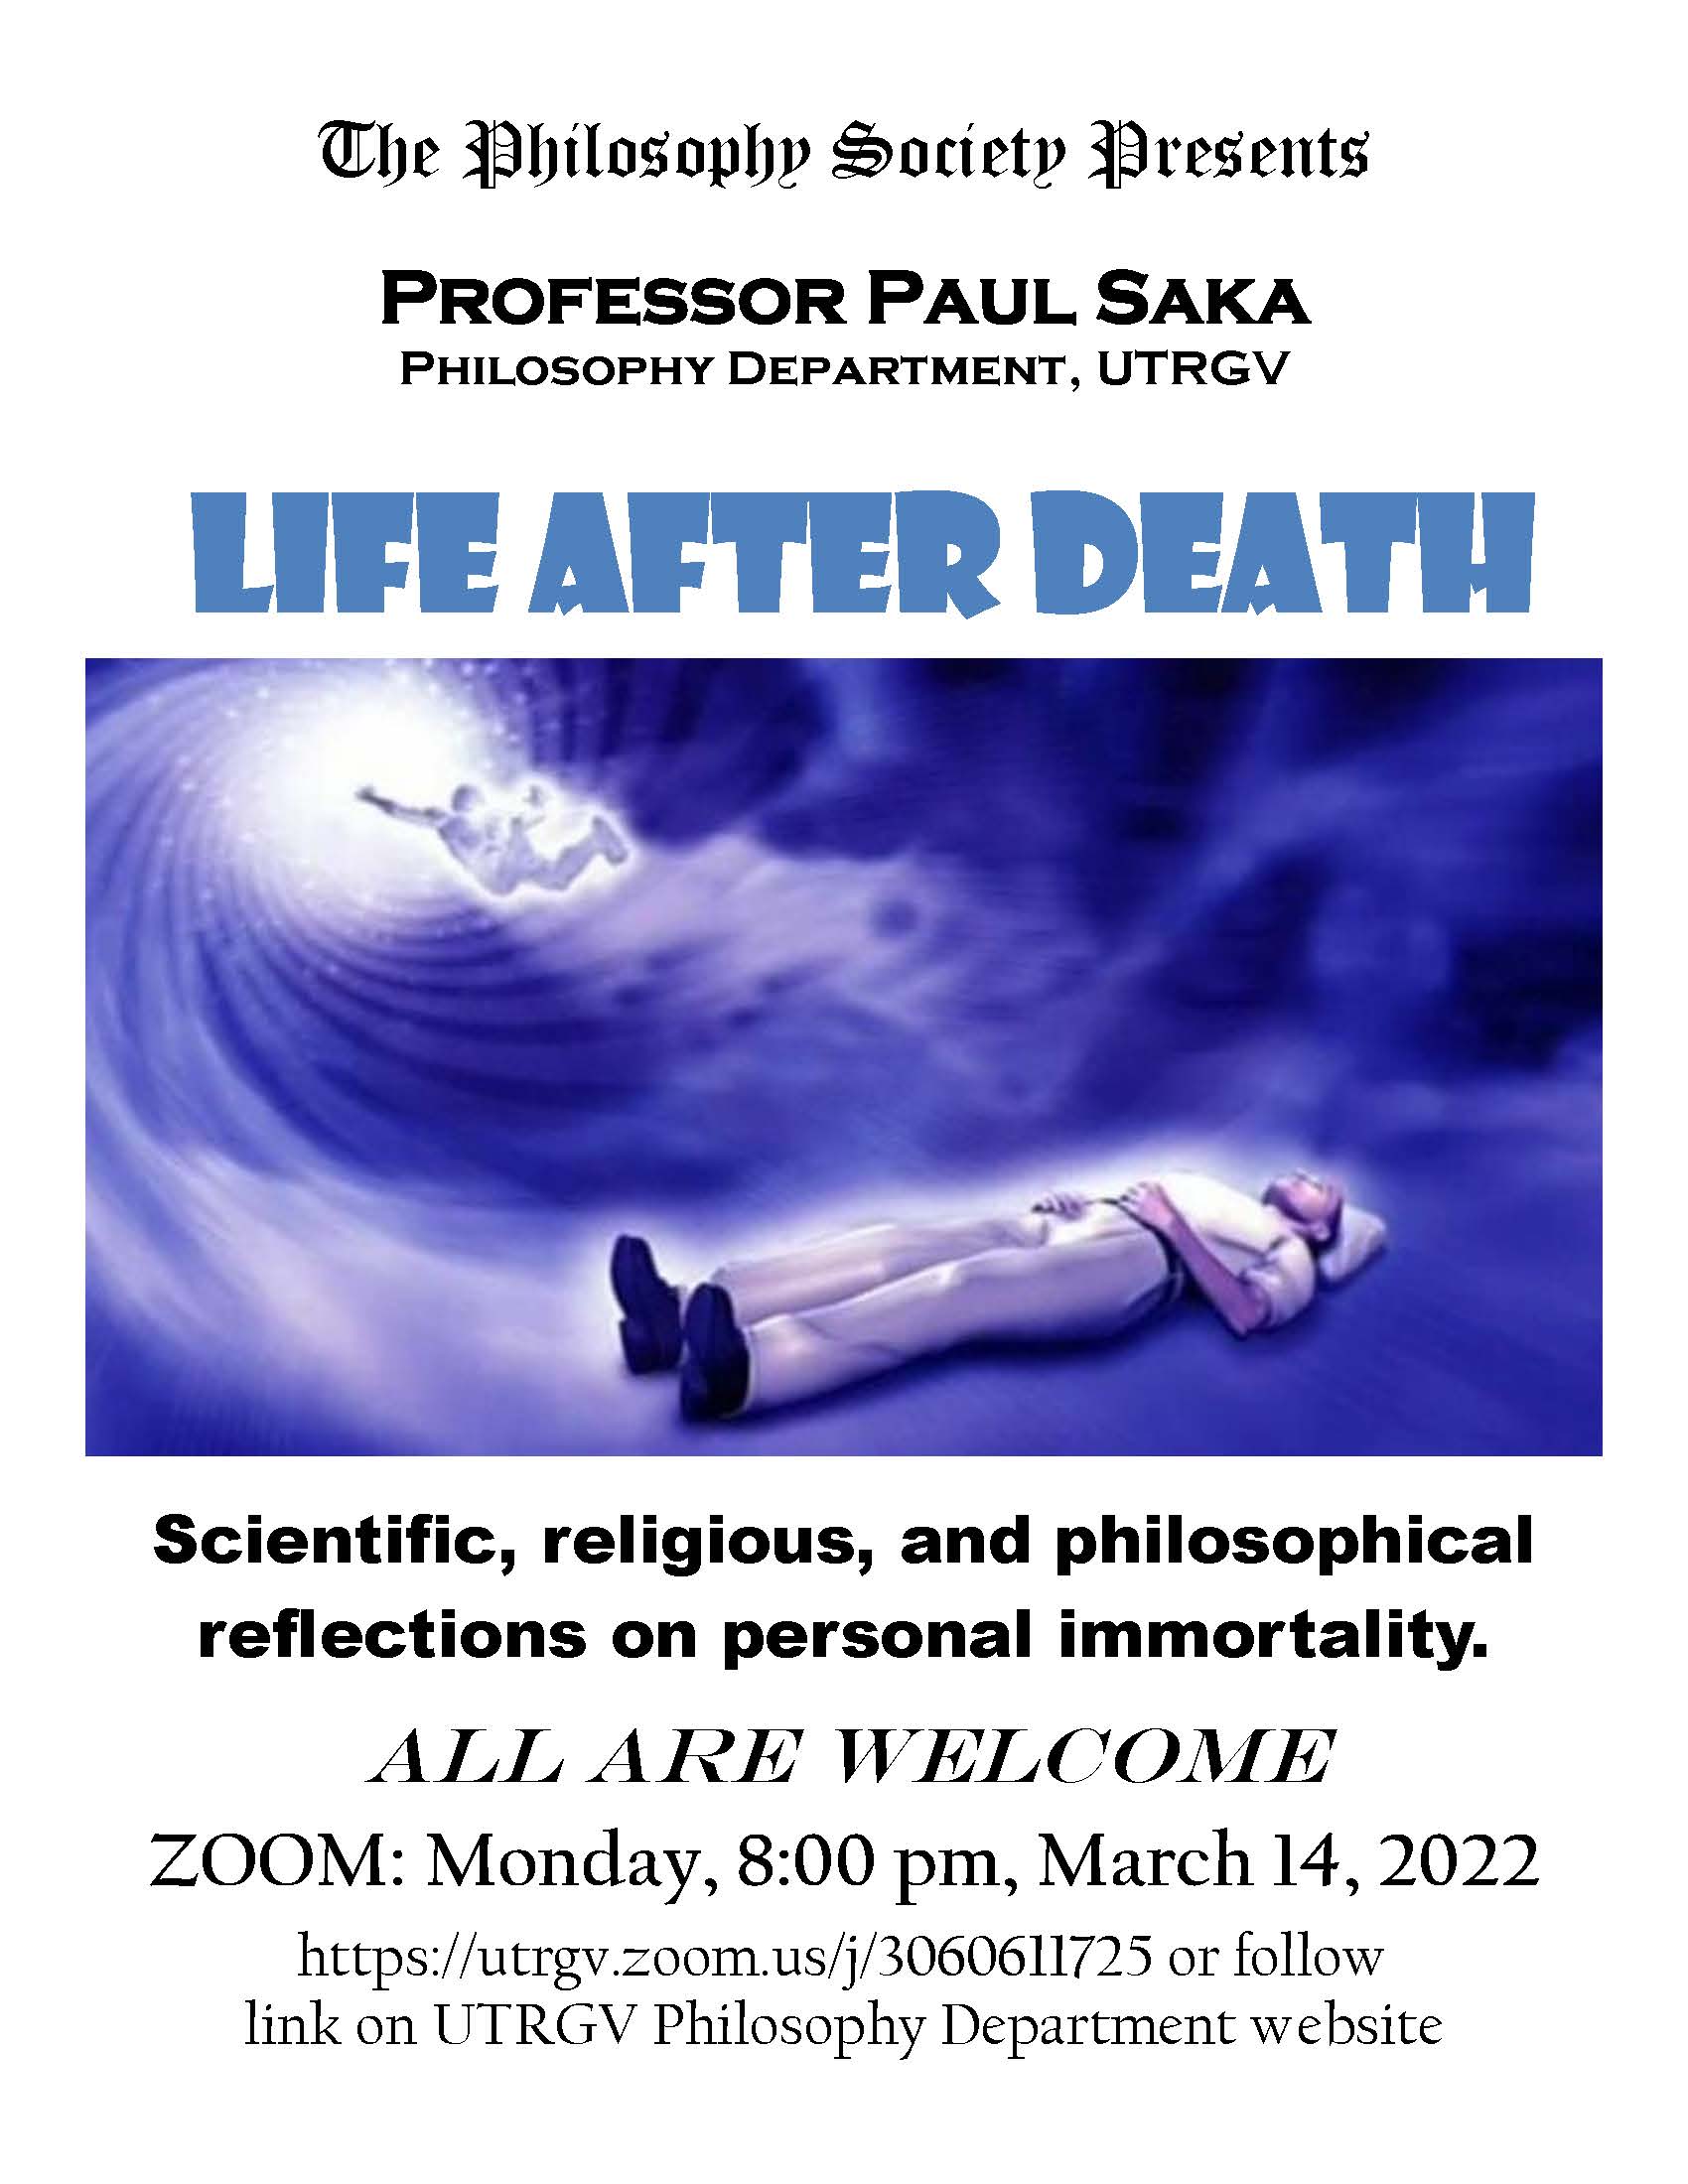 Dr. Paul Saka will be presenting on "Life After Death: Scientific, Religious, and Philosophical Reflections on Personal Immortality"